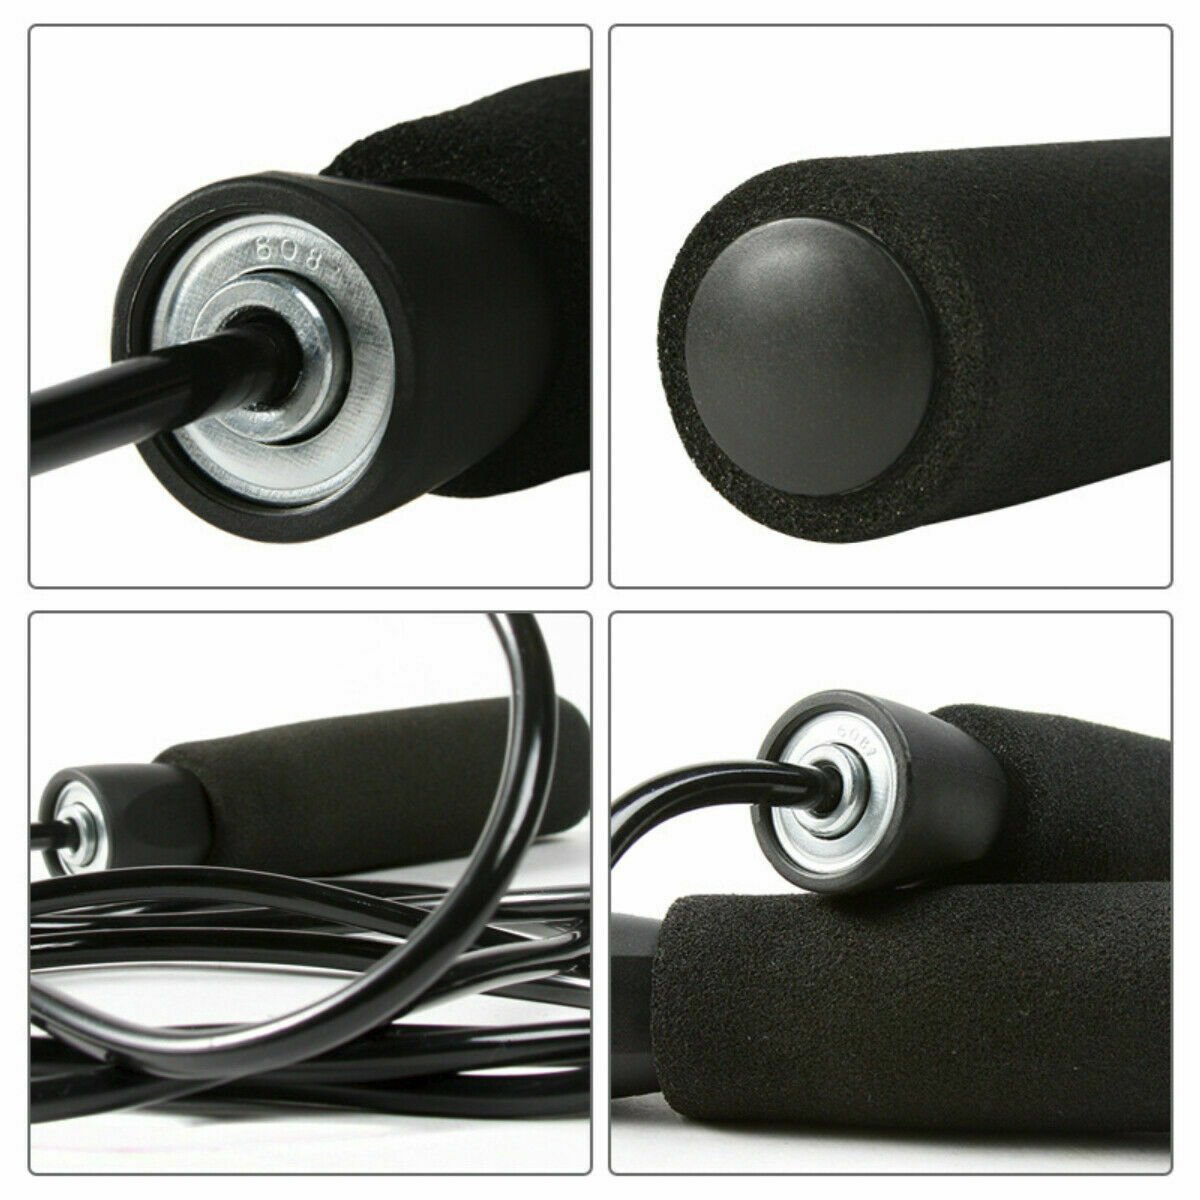 Gym Aerobic Exercise Boxing Skipping Jump Rope Adjustable Bearing Speed Fitness Bearing Jump Rope Tangle-free Jumping Rope Speed Equipments Skipping Adjustable Skipping Rope - InspiredGrabs.com